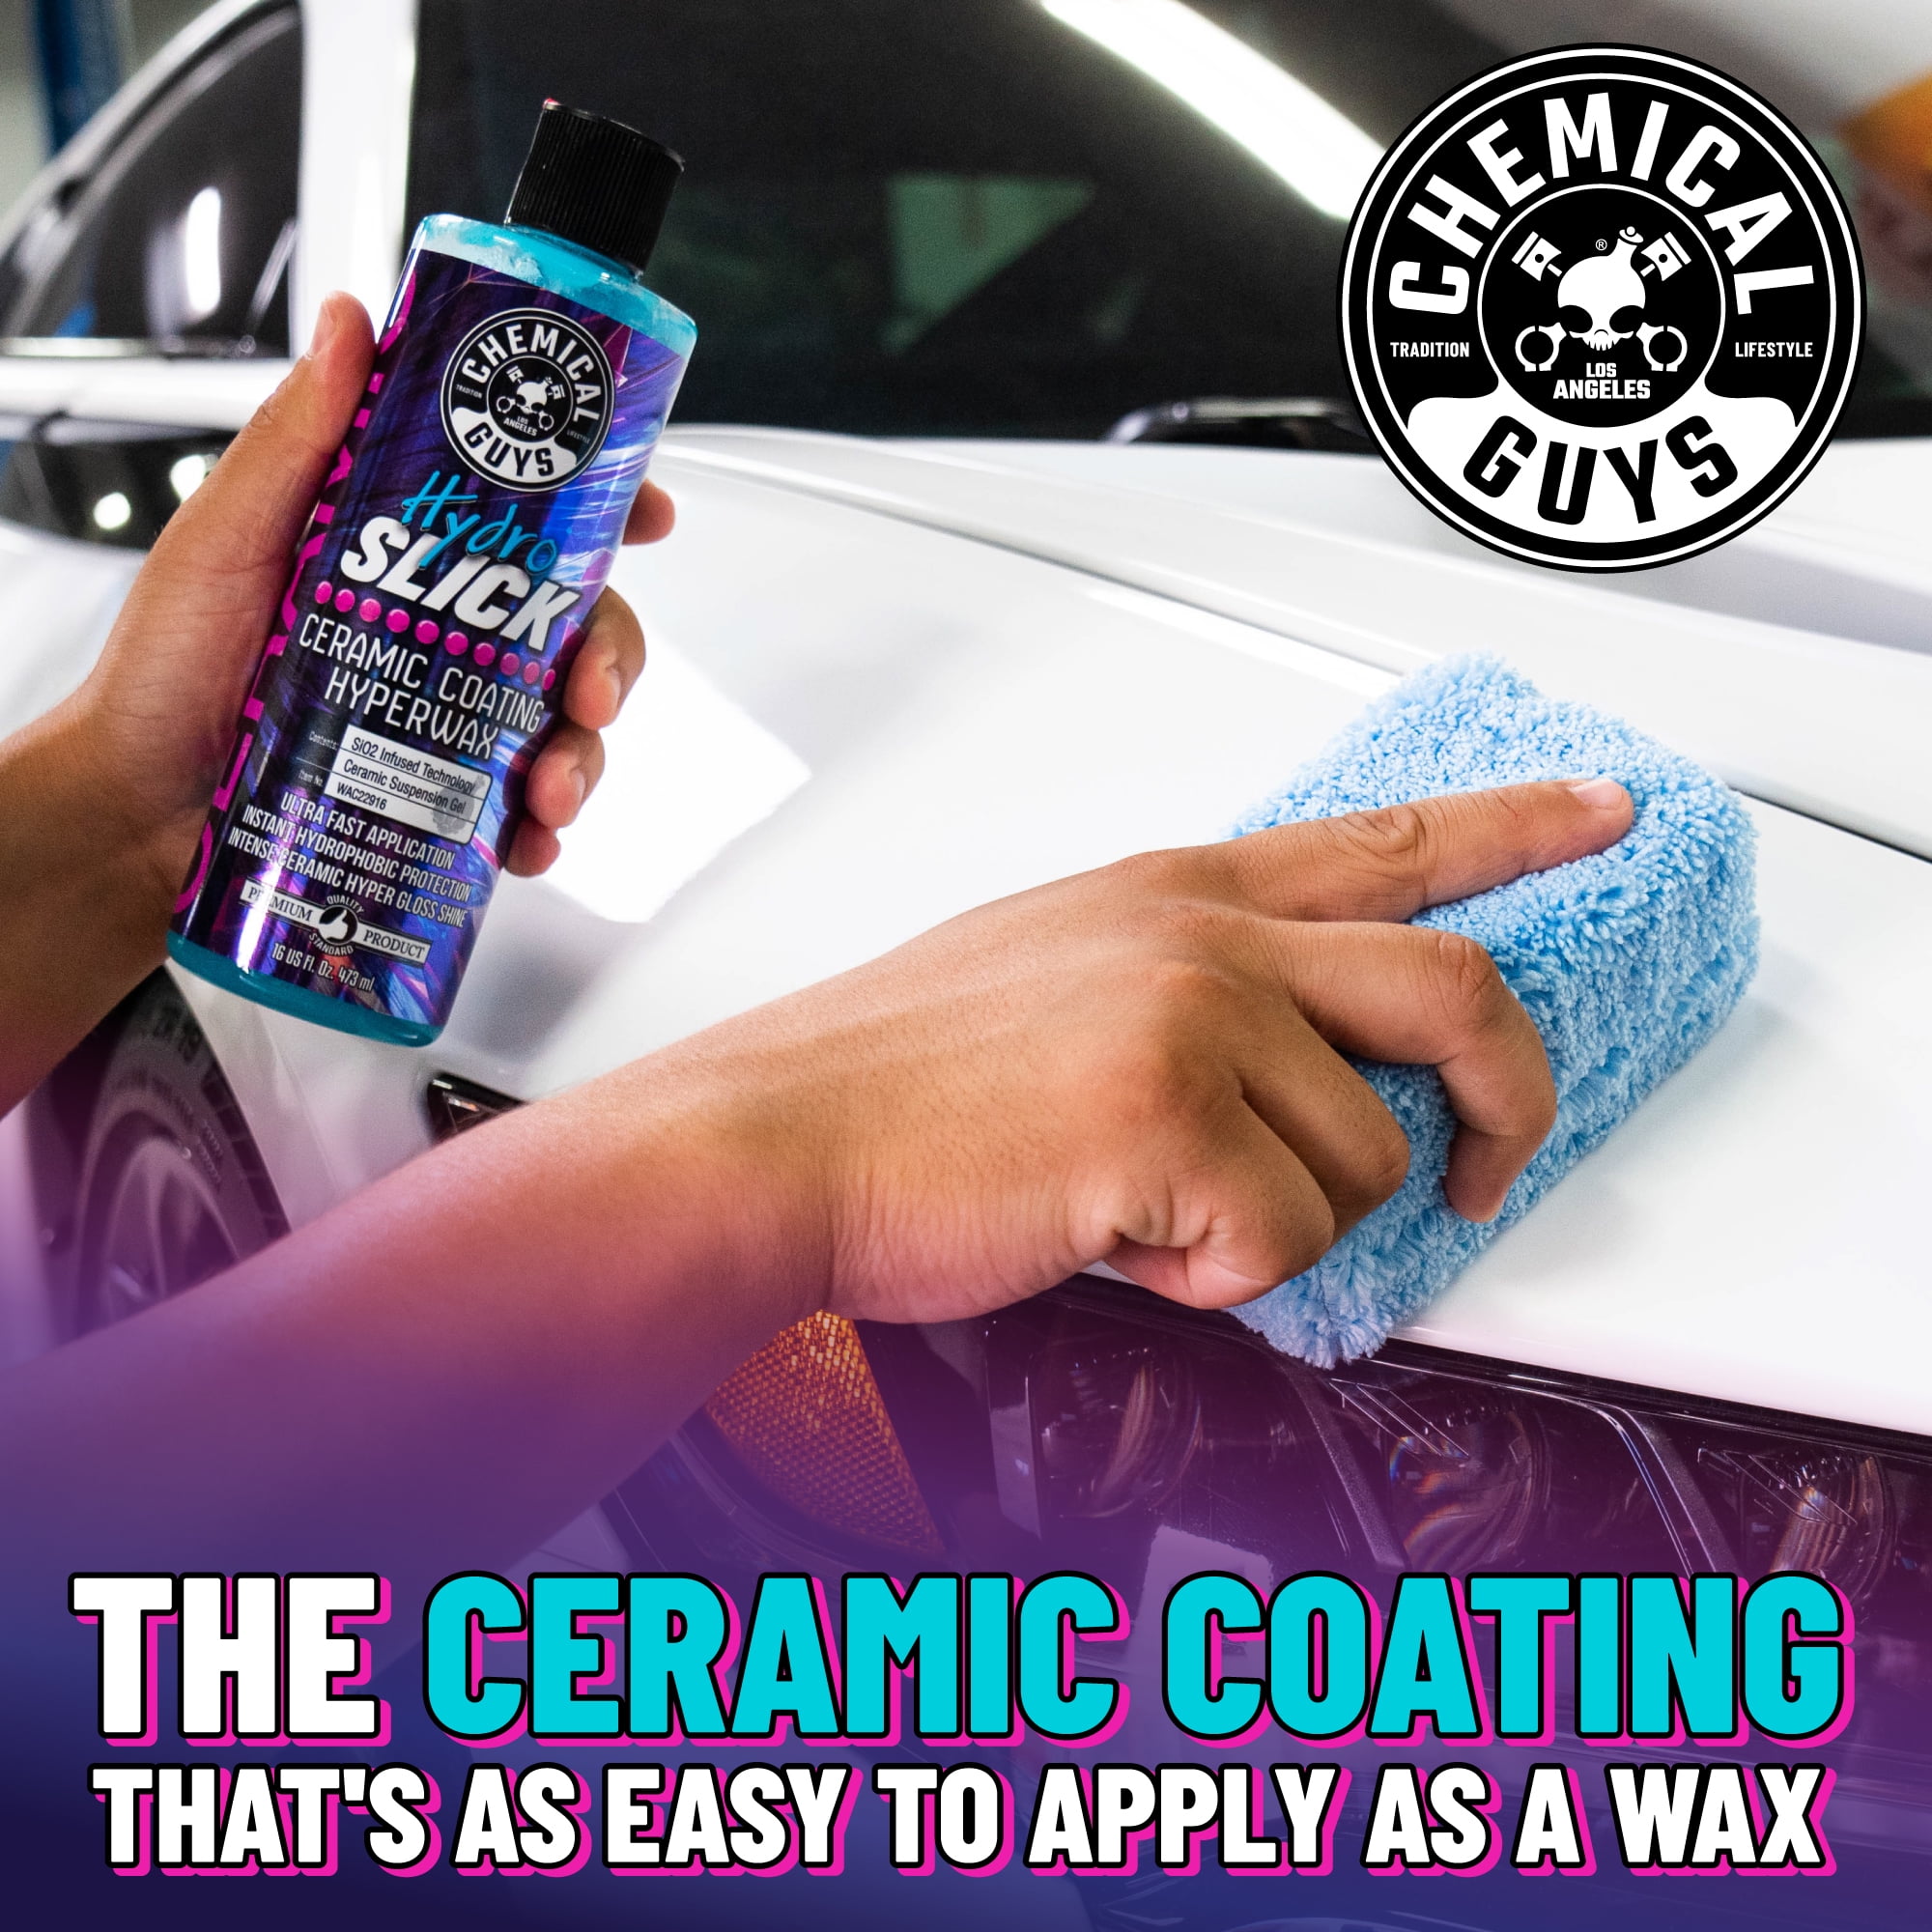 Autopia Professional Detailing Products - Chemical Guys Hydro Ceramic Kit  includes: Chemical Guys Hydro Charge Chemical Guys Hydro Slick Ceramic  Coating Hyperwax Chemical Guys Hydro Suds Ceramic Car Wash Soap Purchase  here